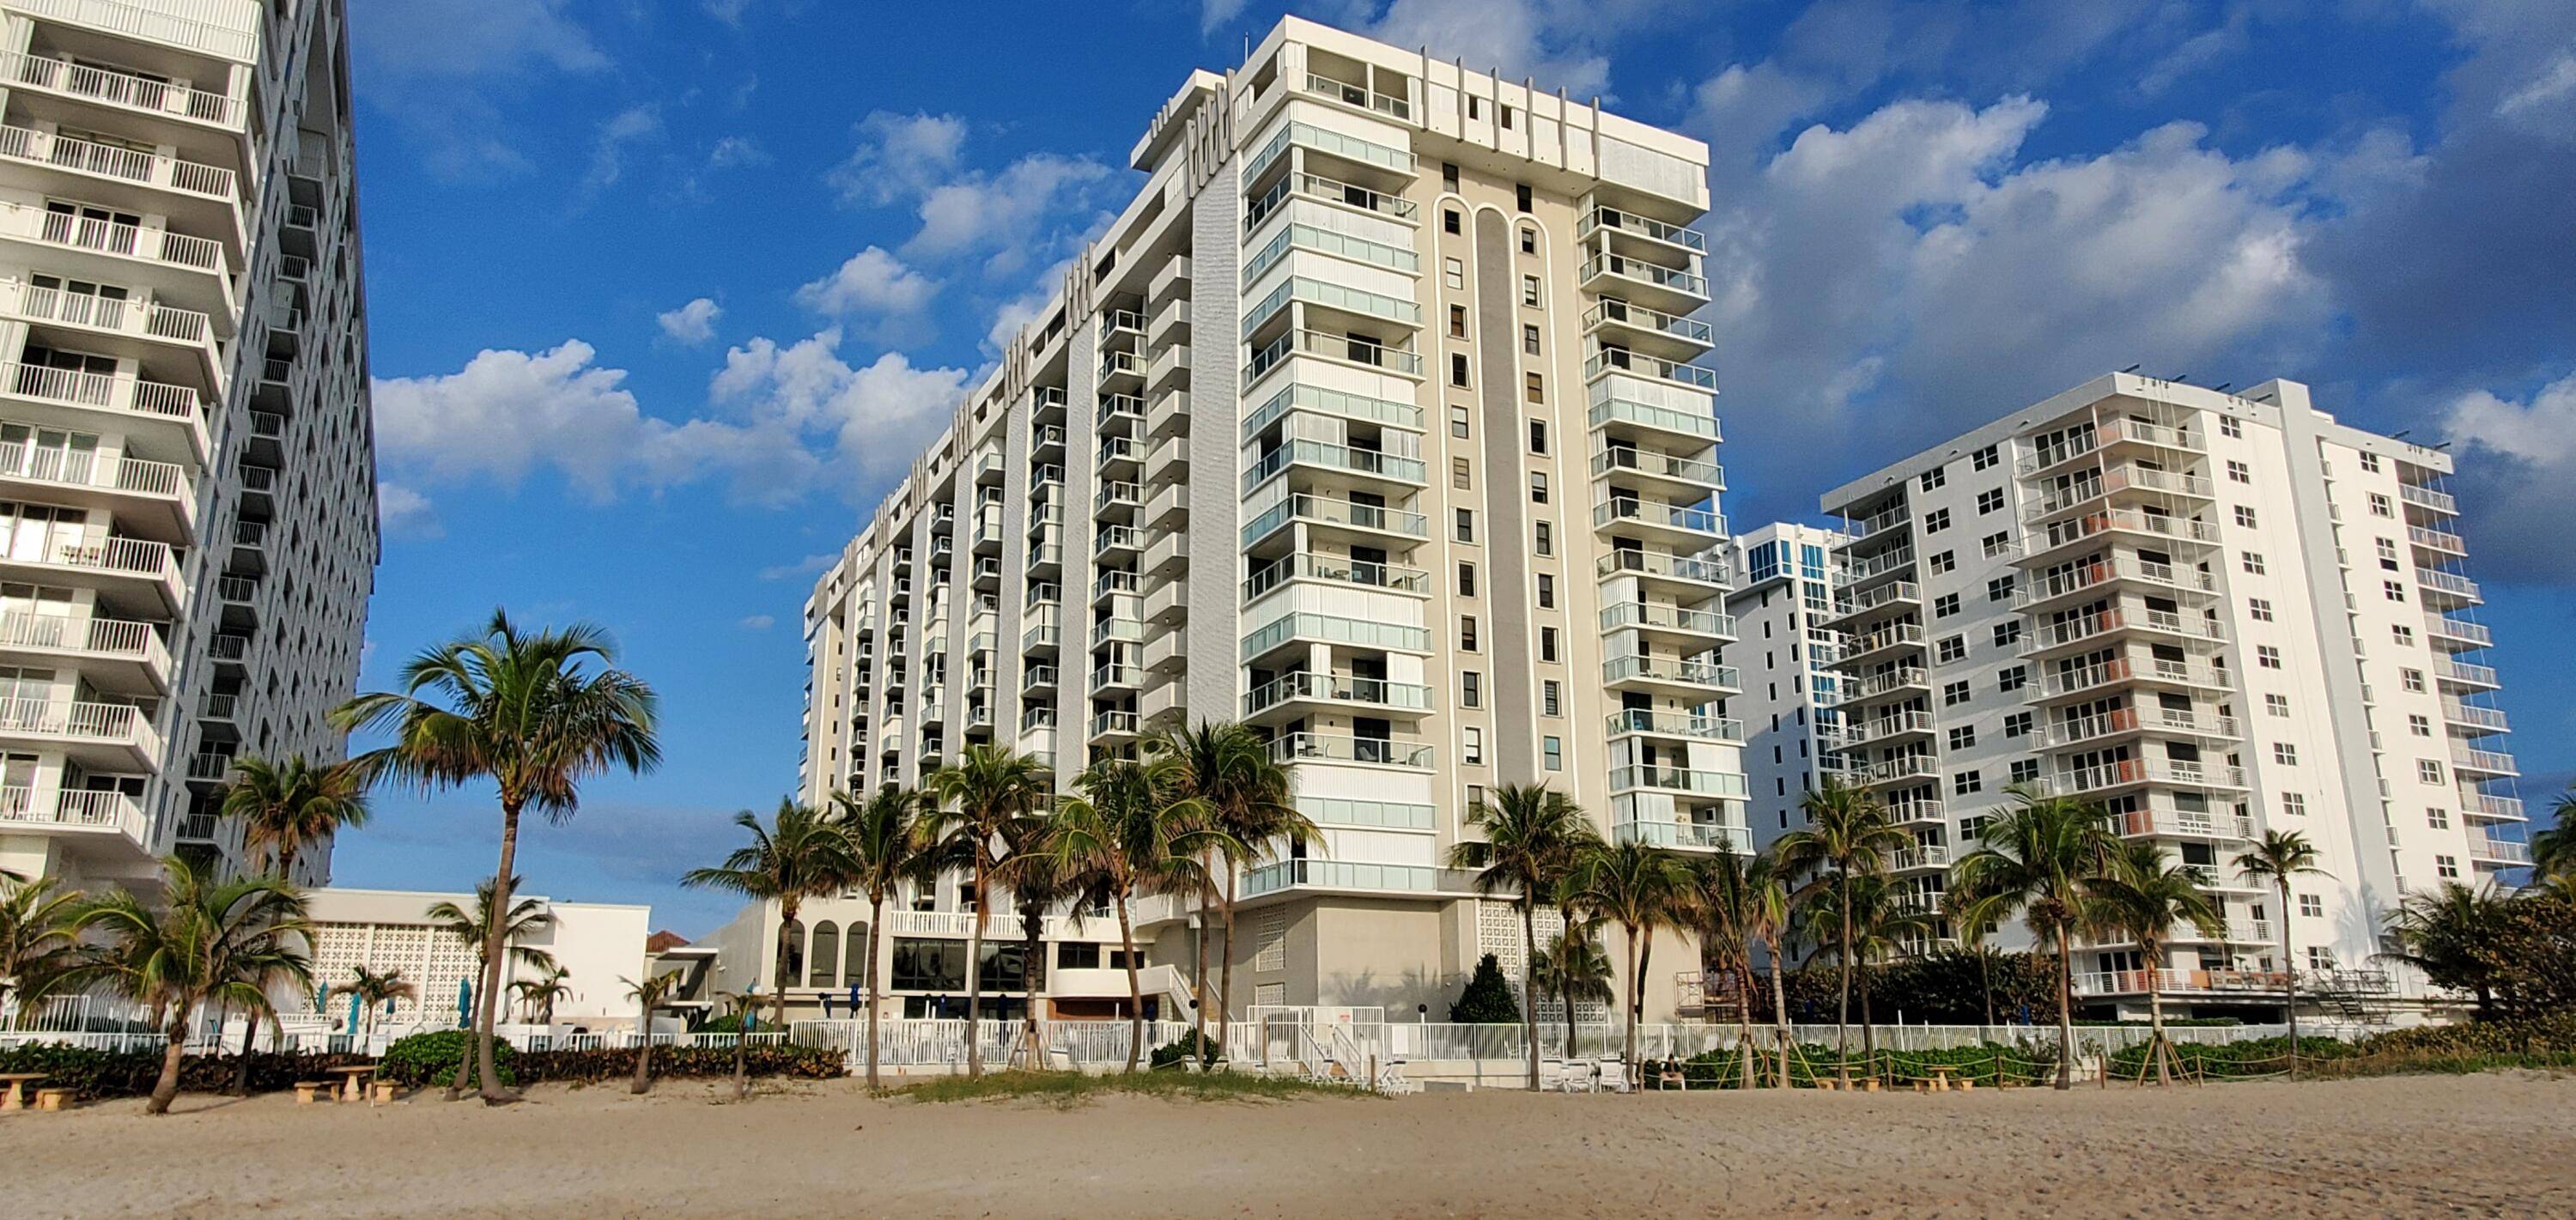 COMPLETELY RENOVATED CONDO ON THE SAND IN POMPANO BEACH.